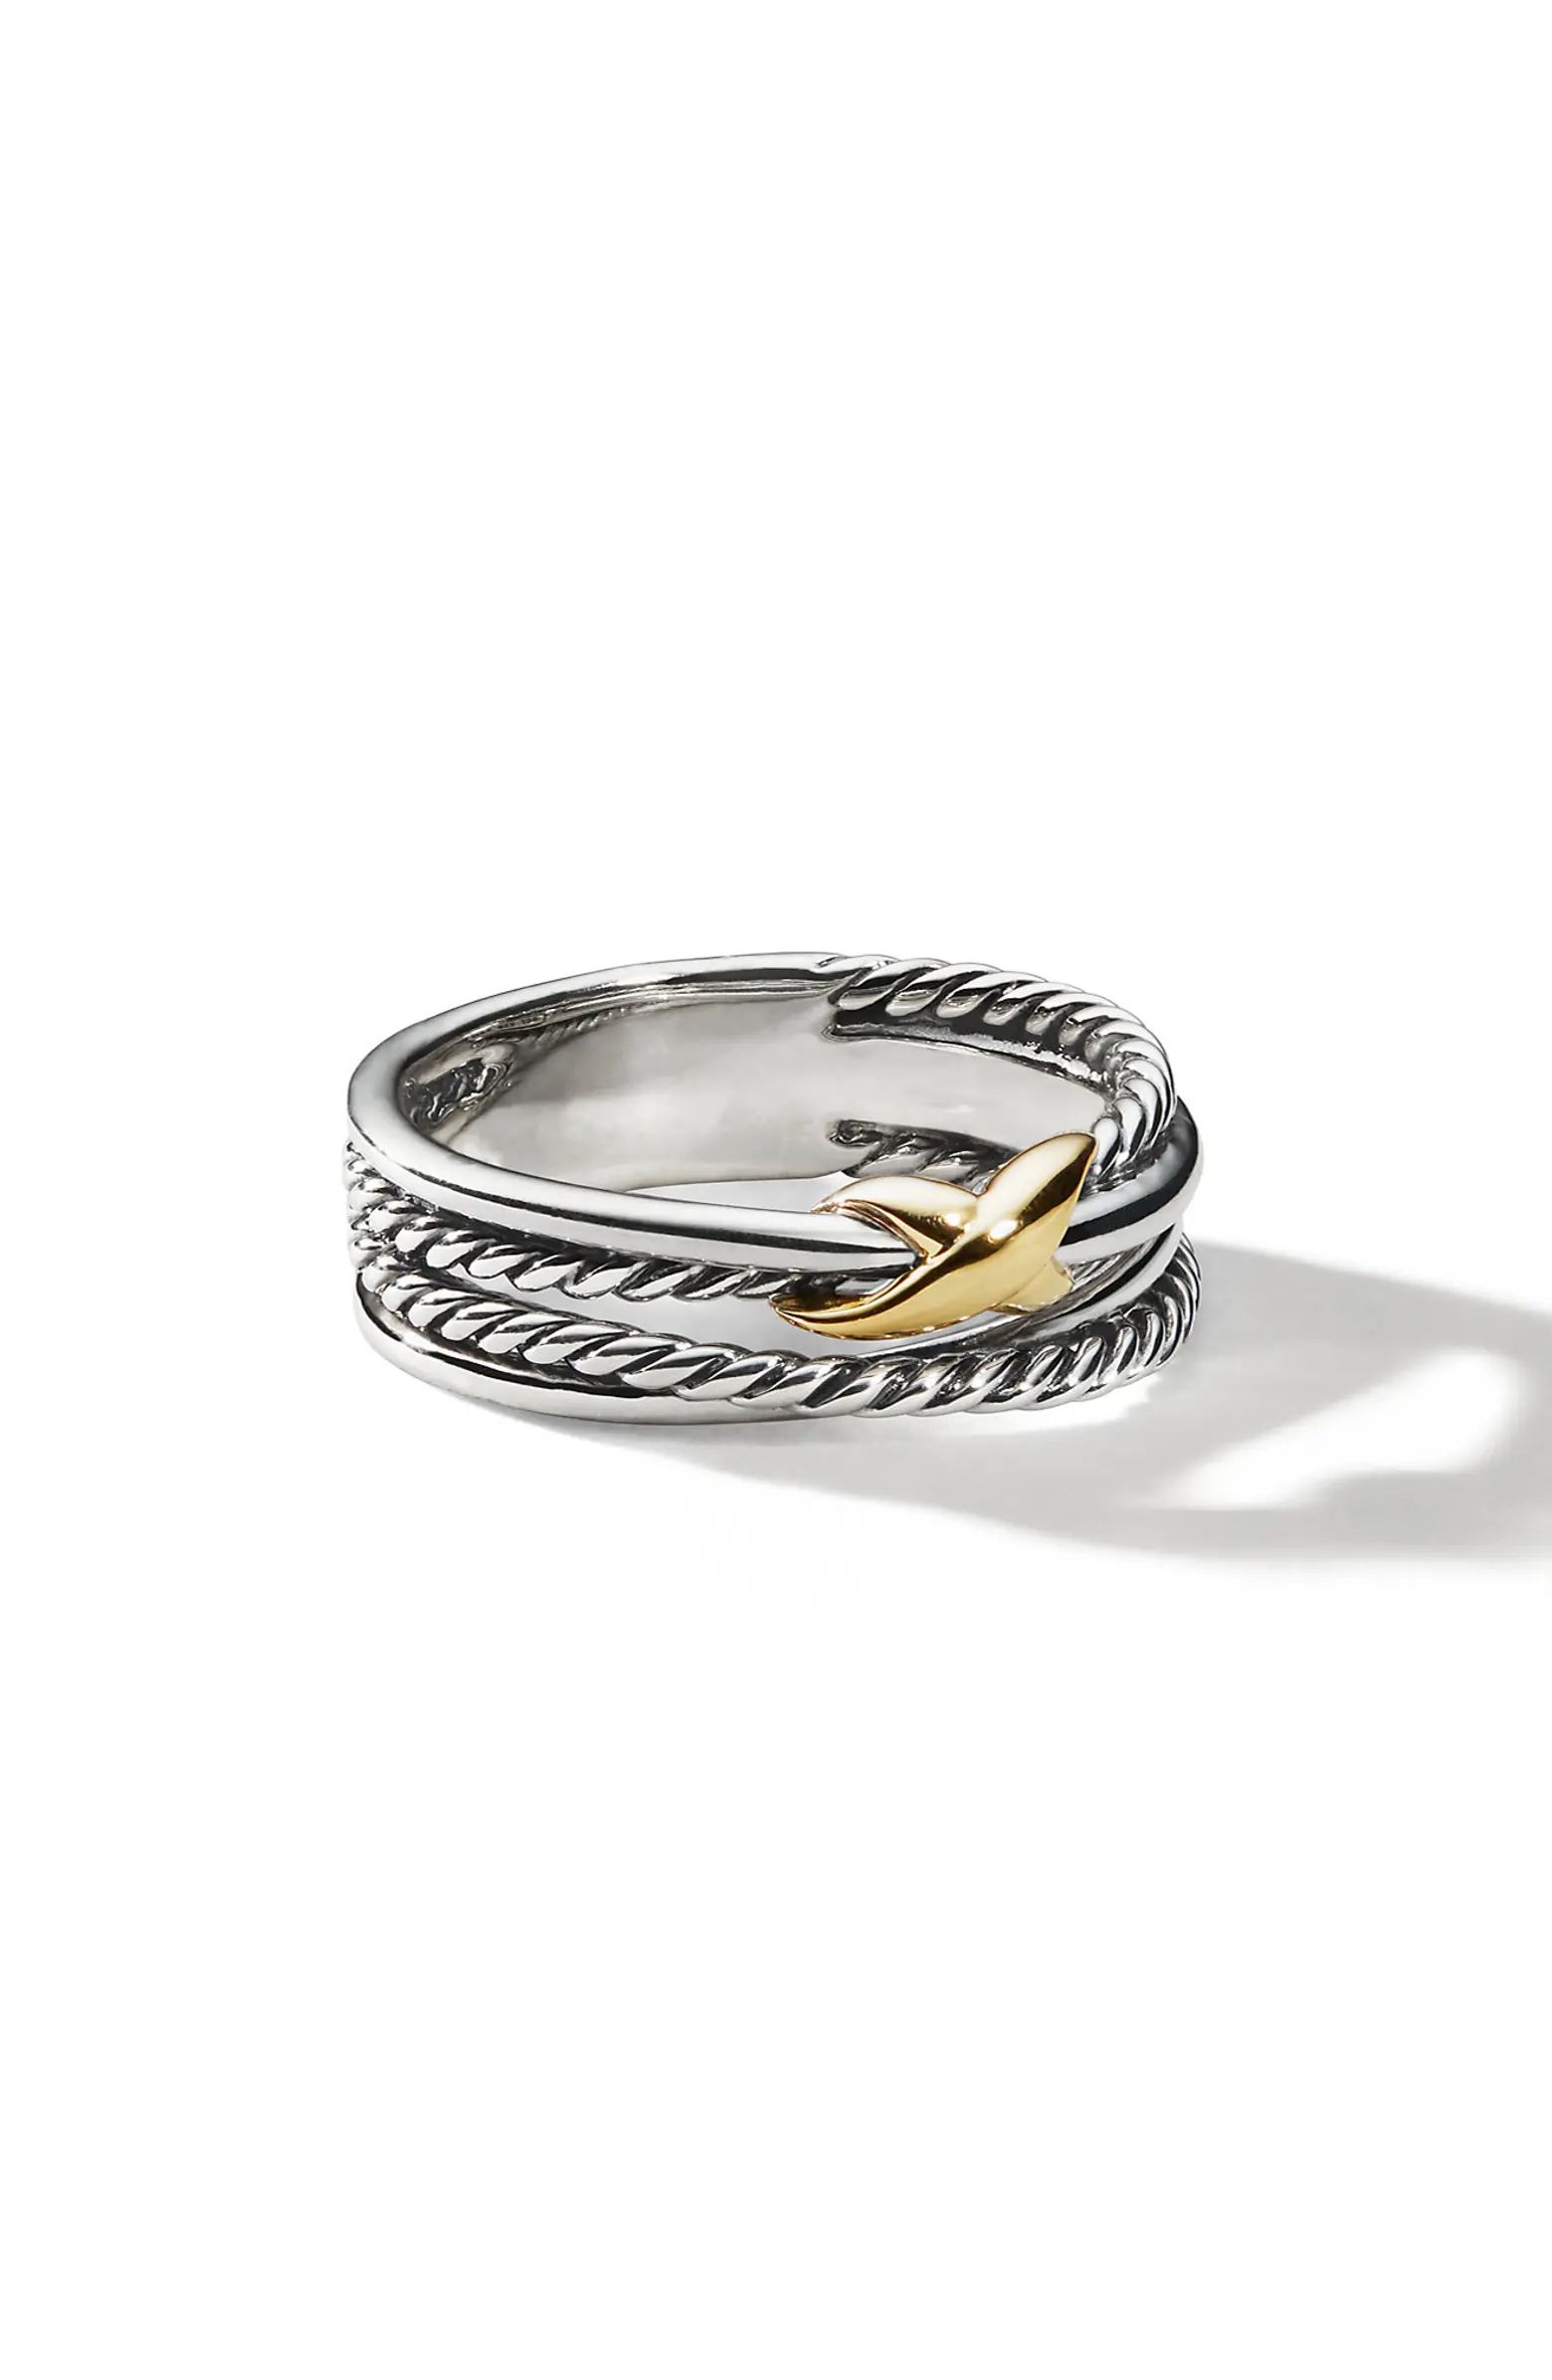 X Crossover Band Ring in Sterling Silver with 18K Yellow Gold, 6mm | Nordstrom